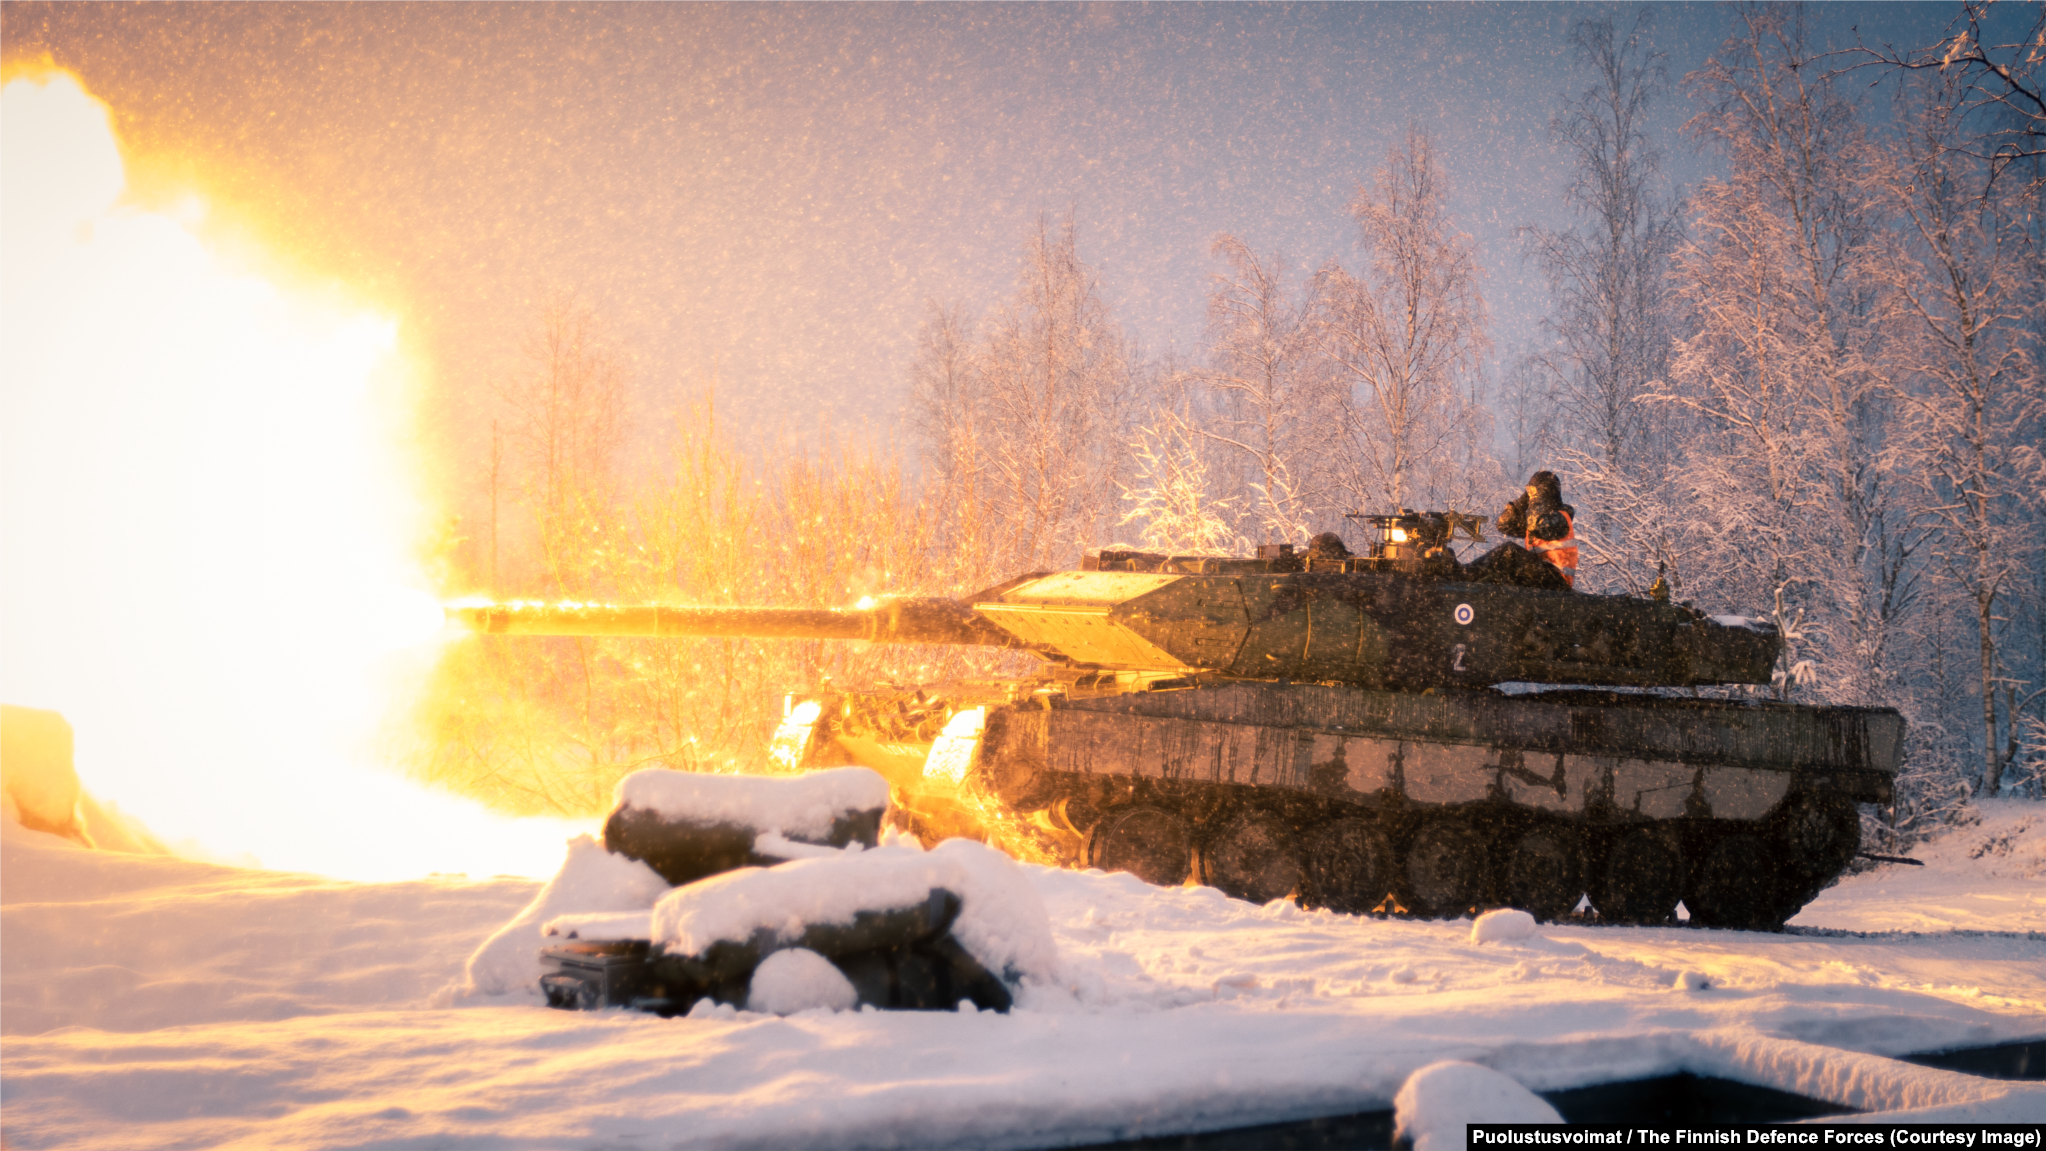 Leopard 2 Tank Finland reportedly has 200 of these German-made vehicles. Leopard 2s are faster than many Soviet-designed equivalents, and a pool of thousands of the vehicles in European arsenals makes maintenance and swapping out parts relatively simple.  